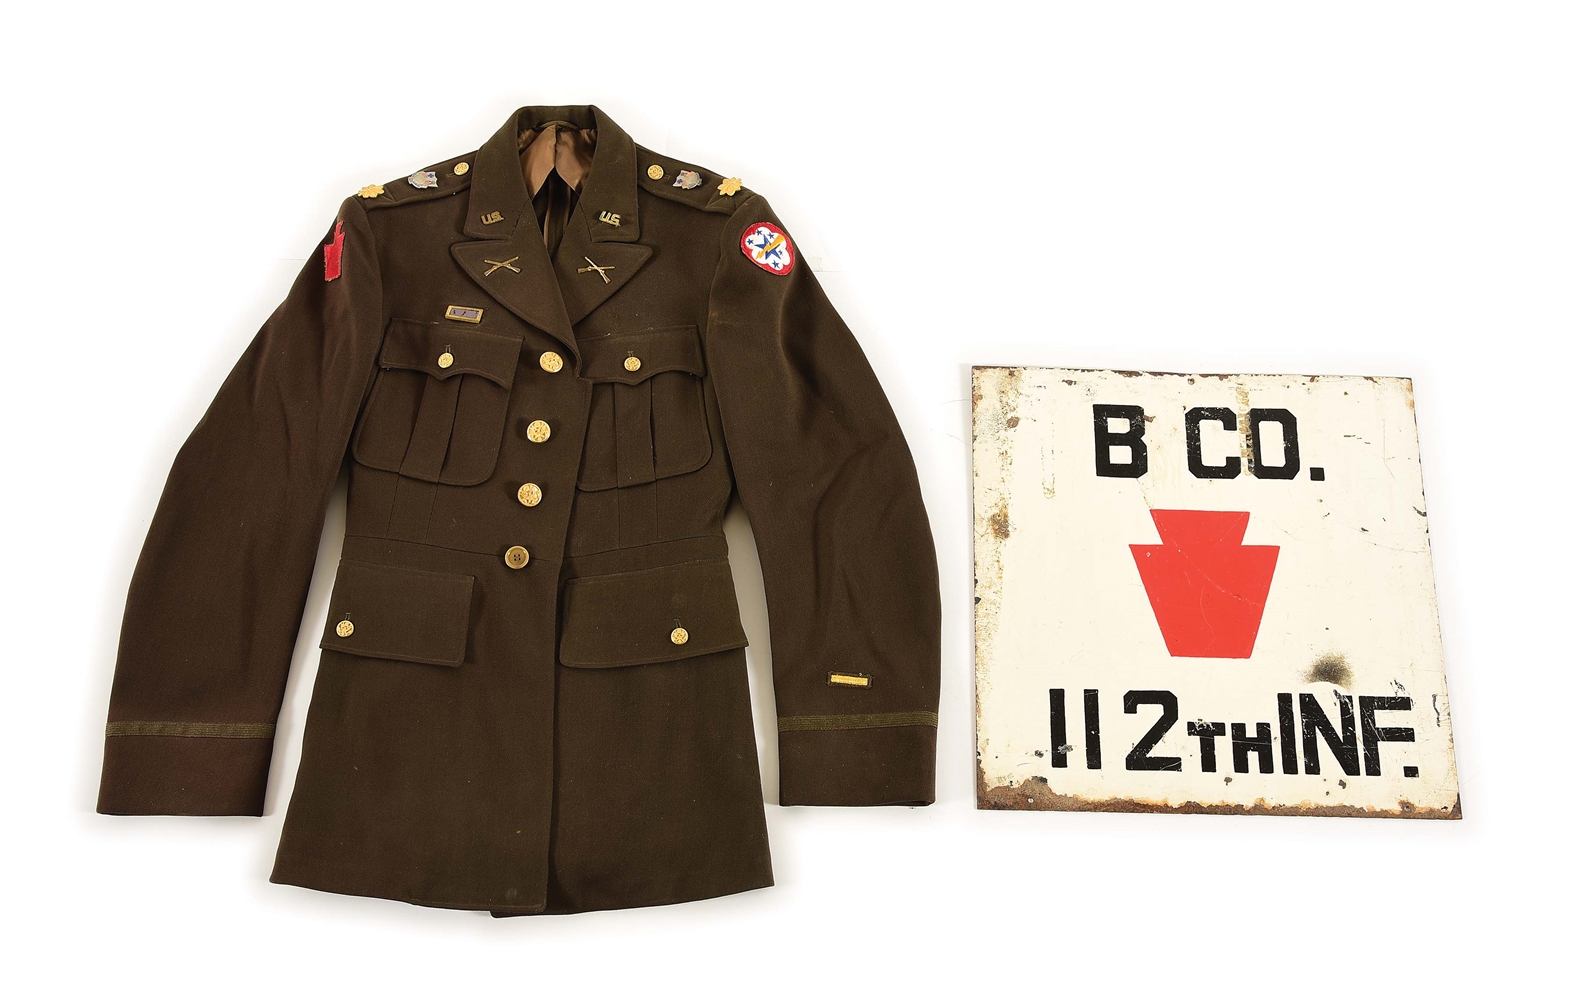 LOT OF 2: US WWII 28TH INFANTRY DIVISION UNIFORM AND 112TH INFANTRY REGIMENT SIGN.